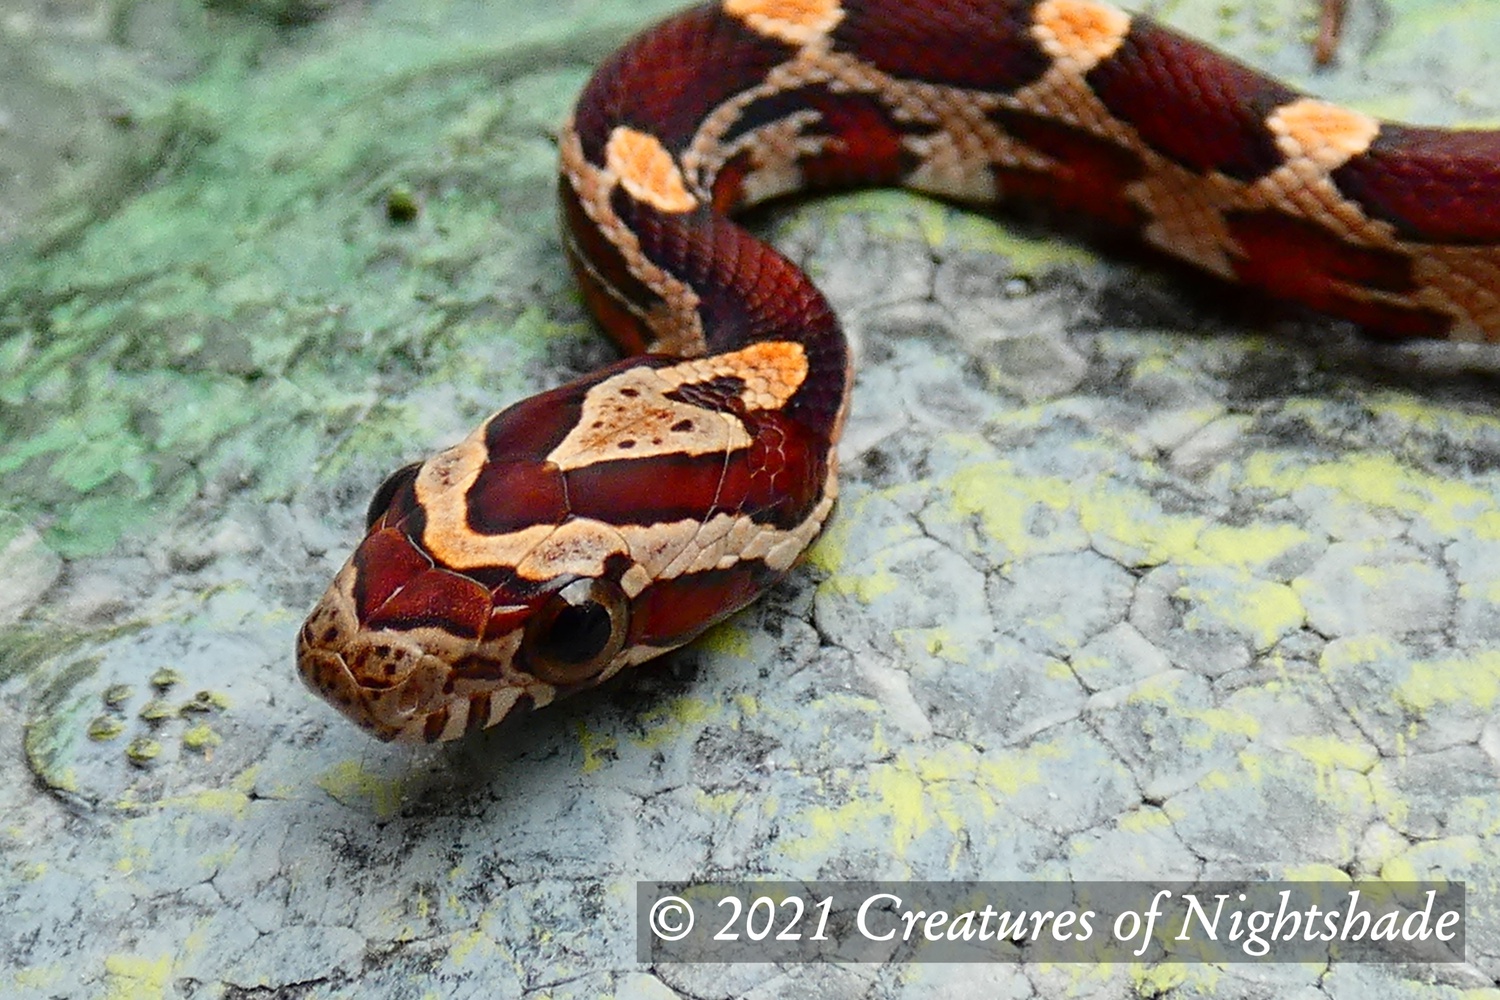 Classic Corn Snake by Creatures of Nightshade